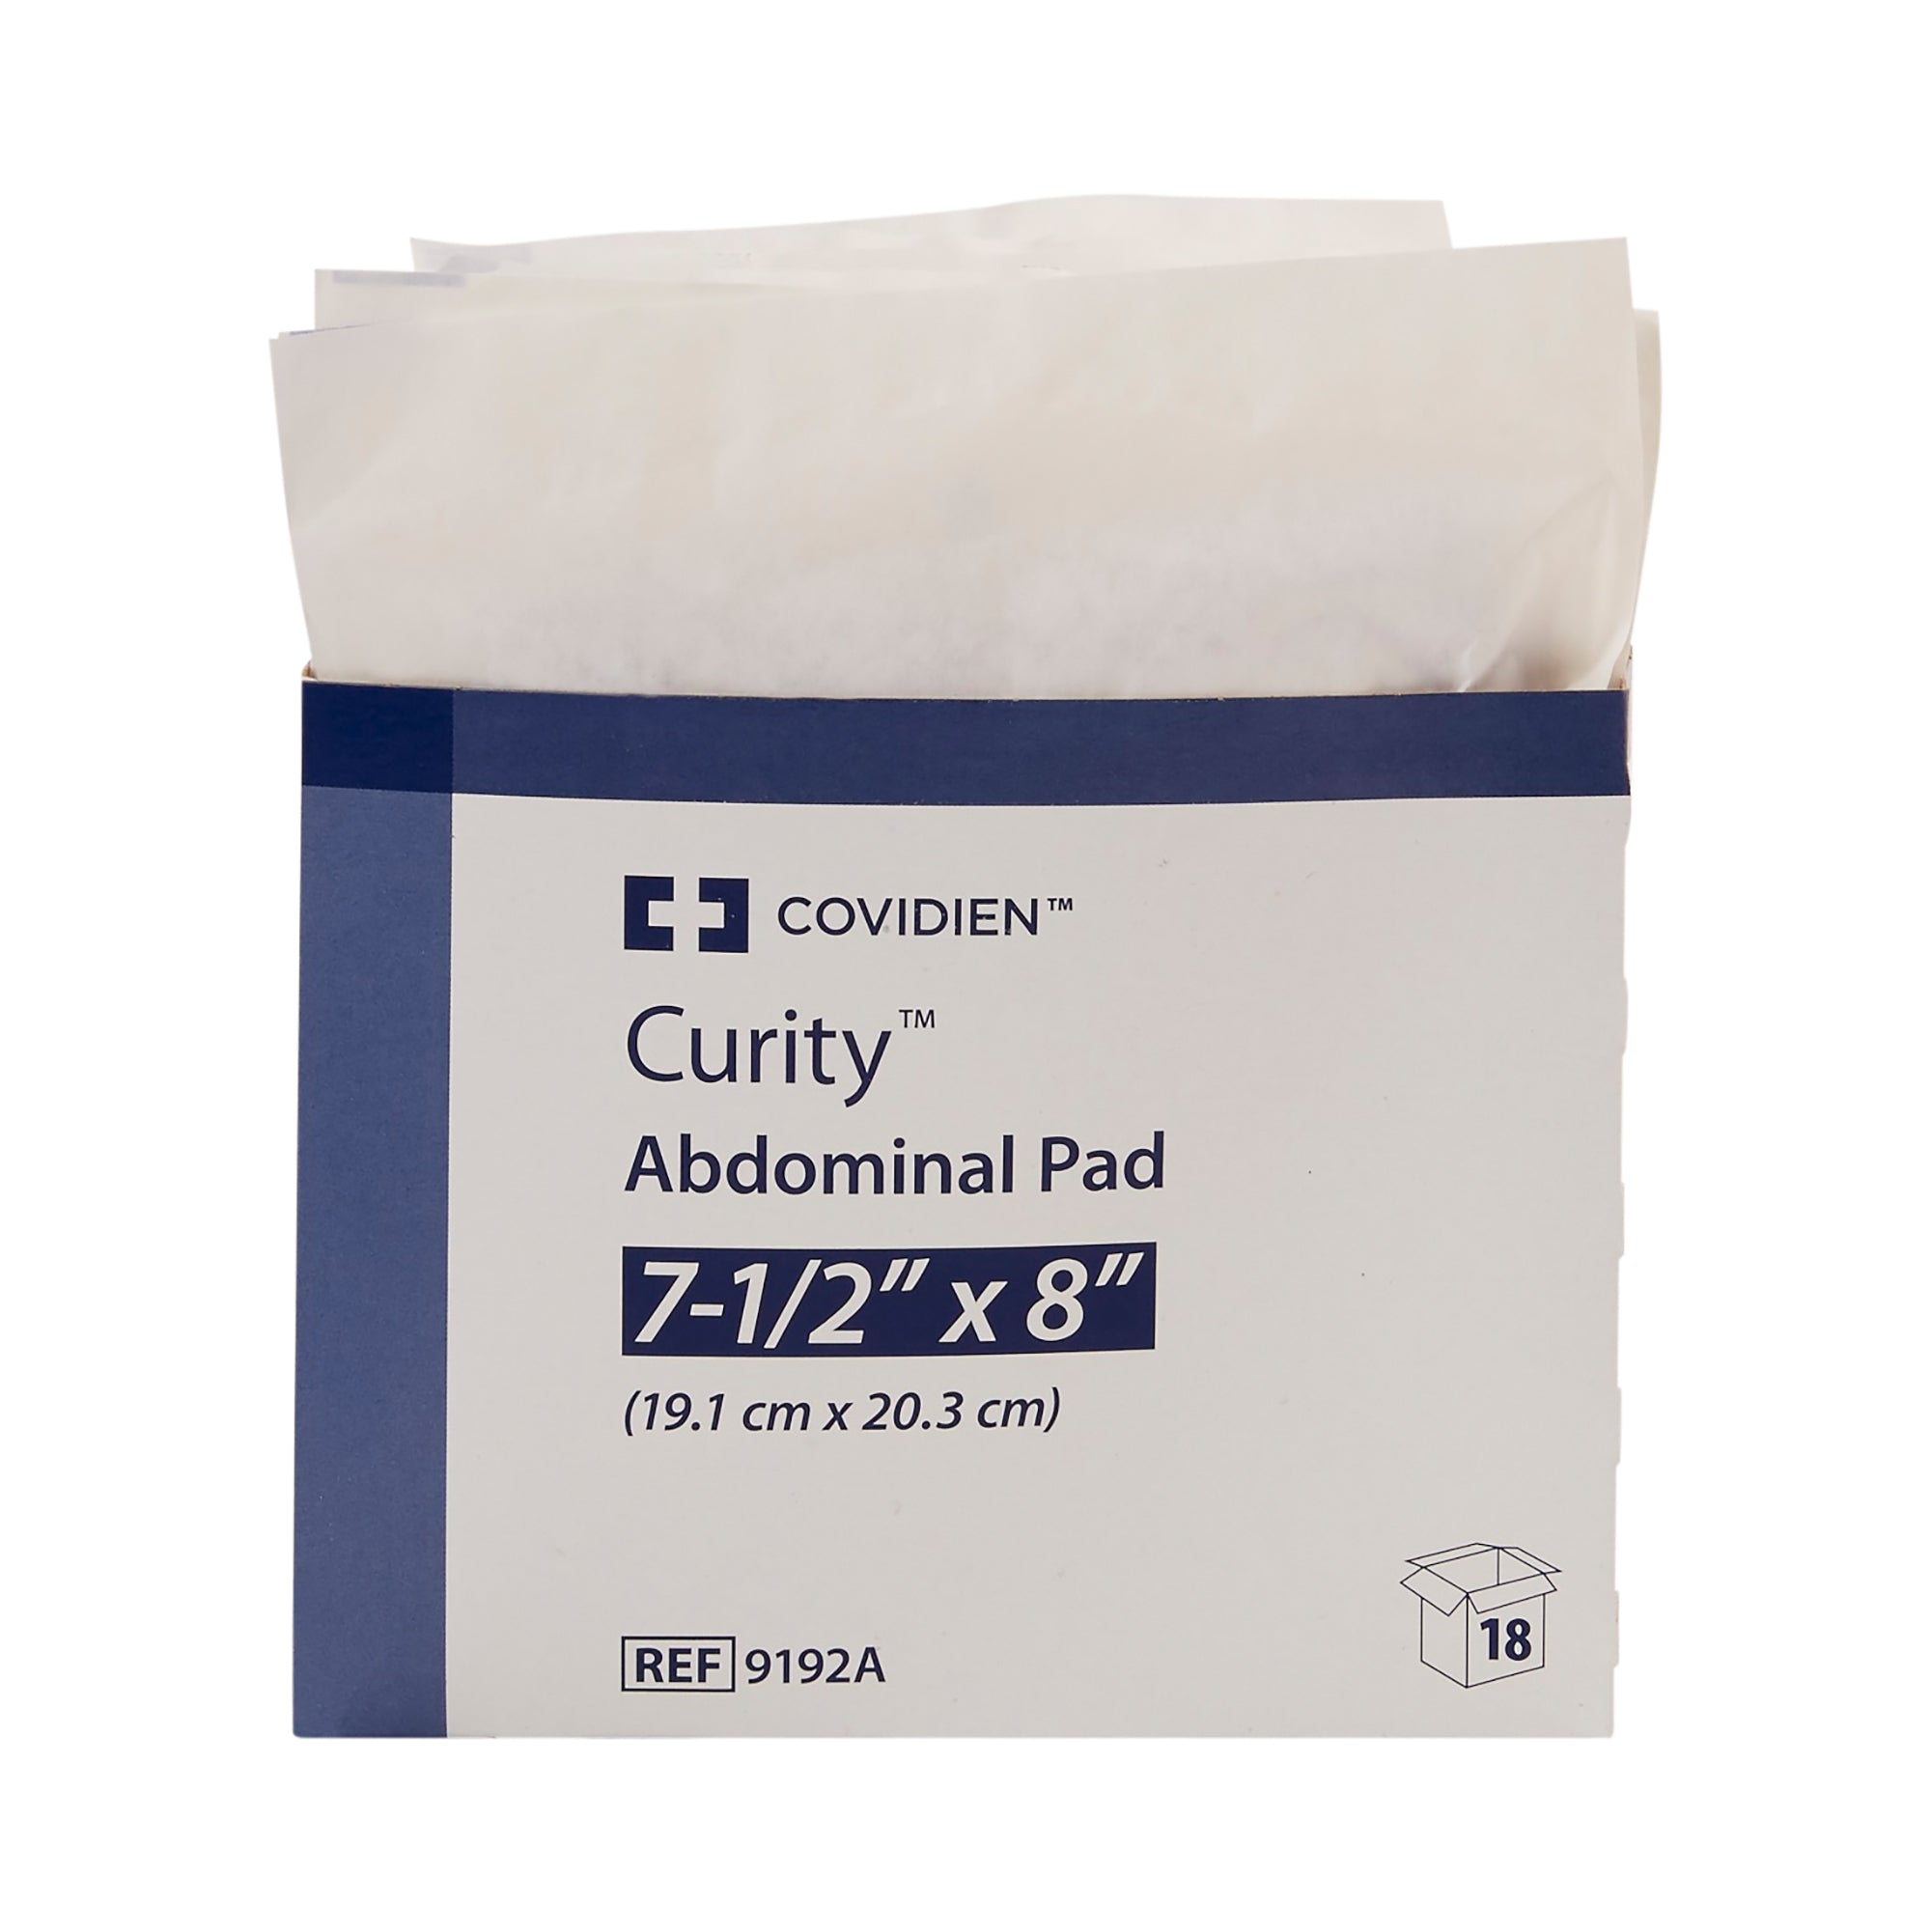 Curity WET-PRUF™ Sterile Abdominal Pad